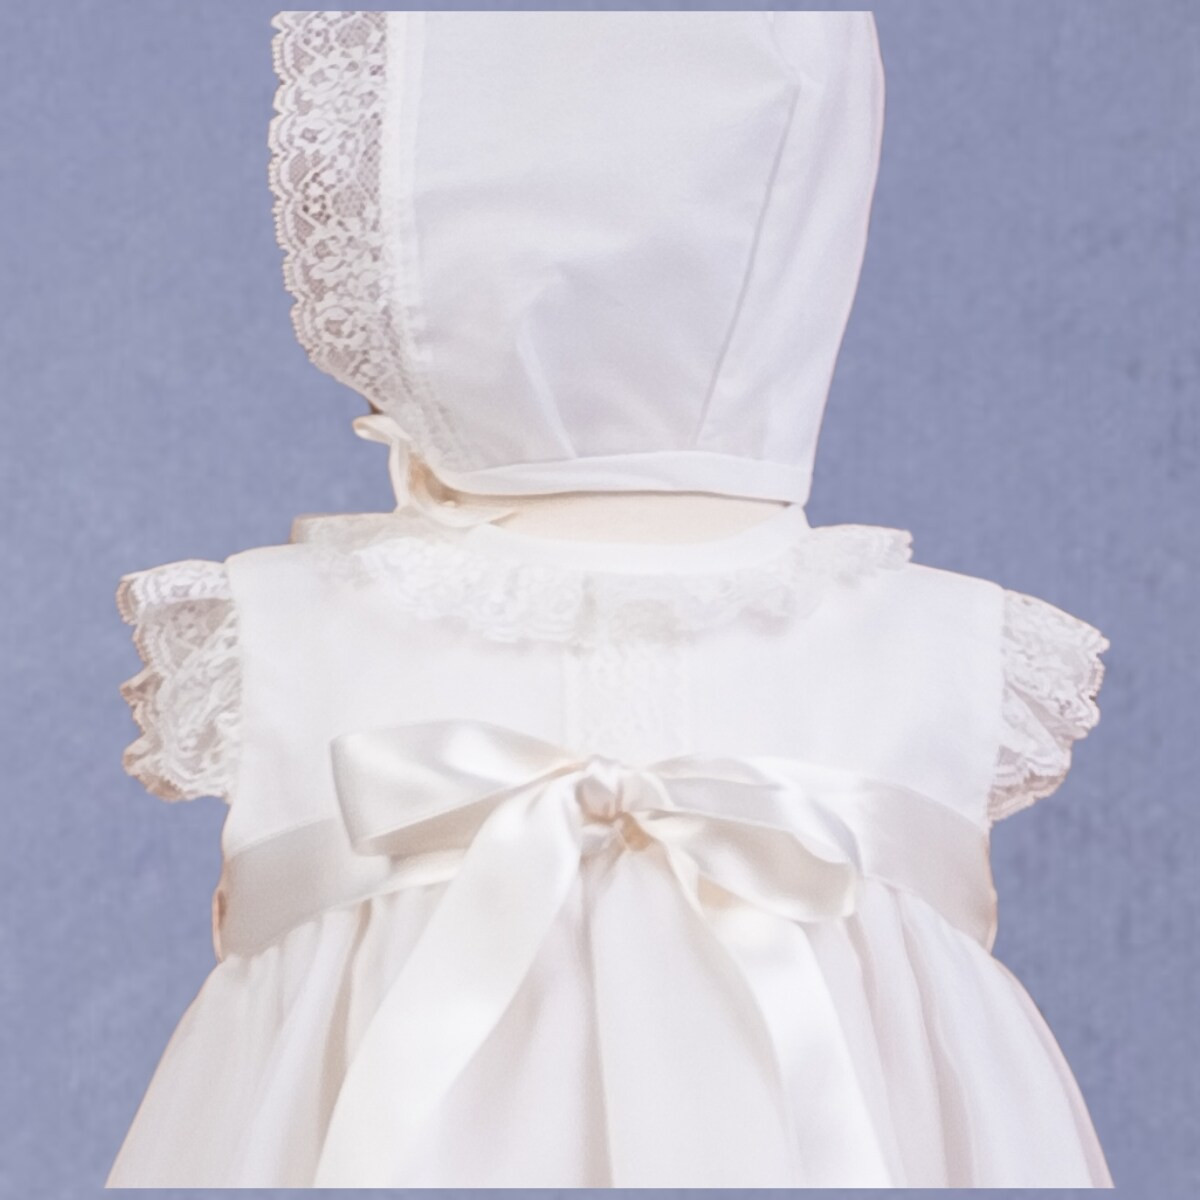 GIRLS CHRISTENING GOWN WITH CAP MISHA BABY - 4